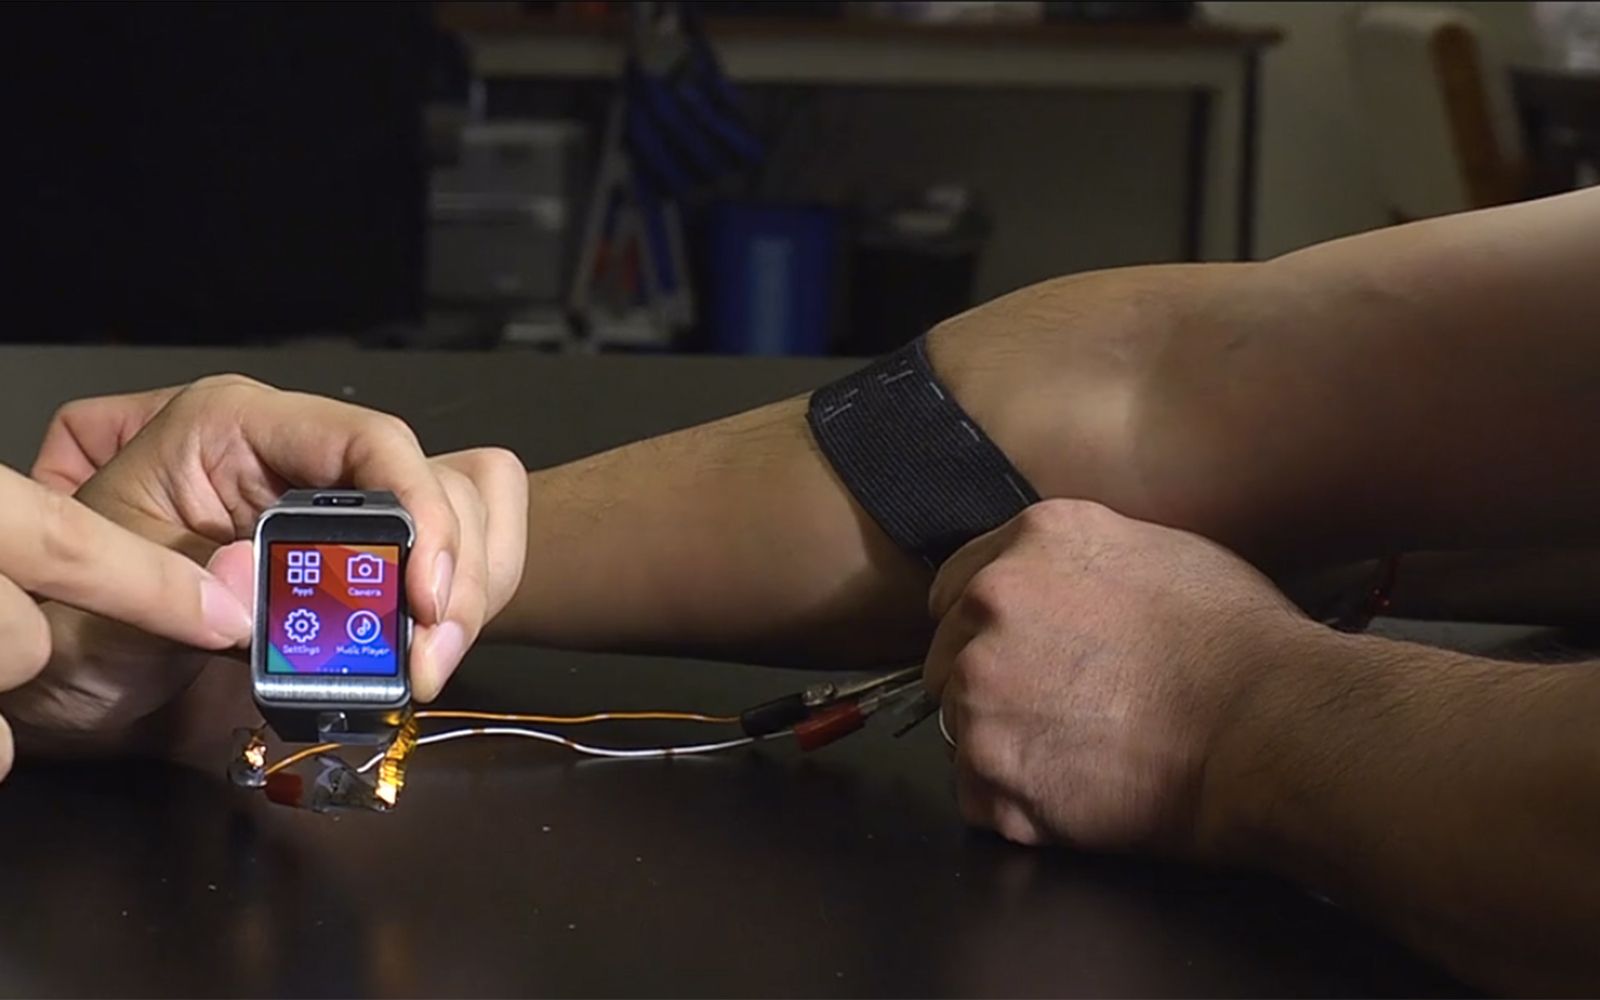 the flexible battery is here soon your watch strap will be a power supply image 1